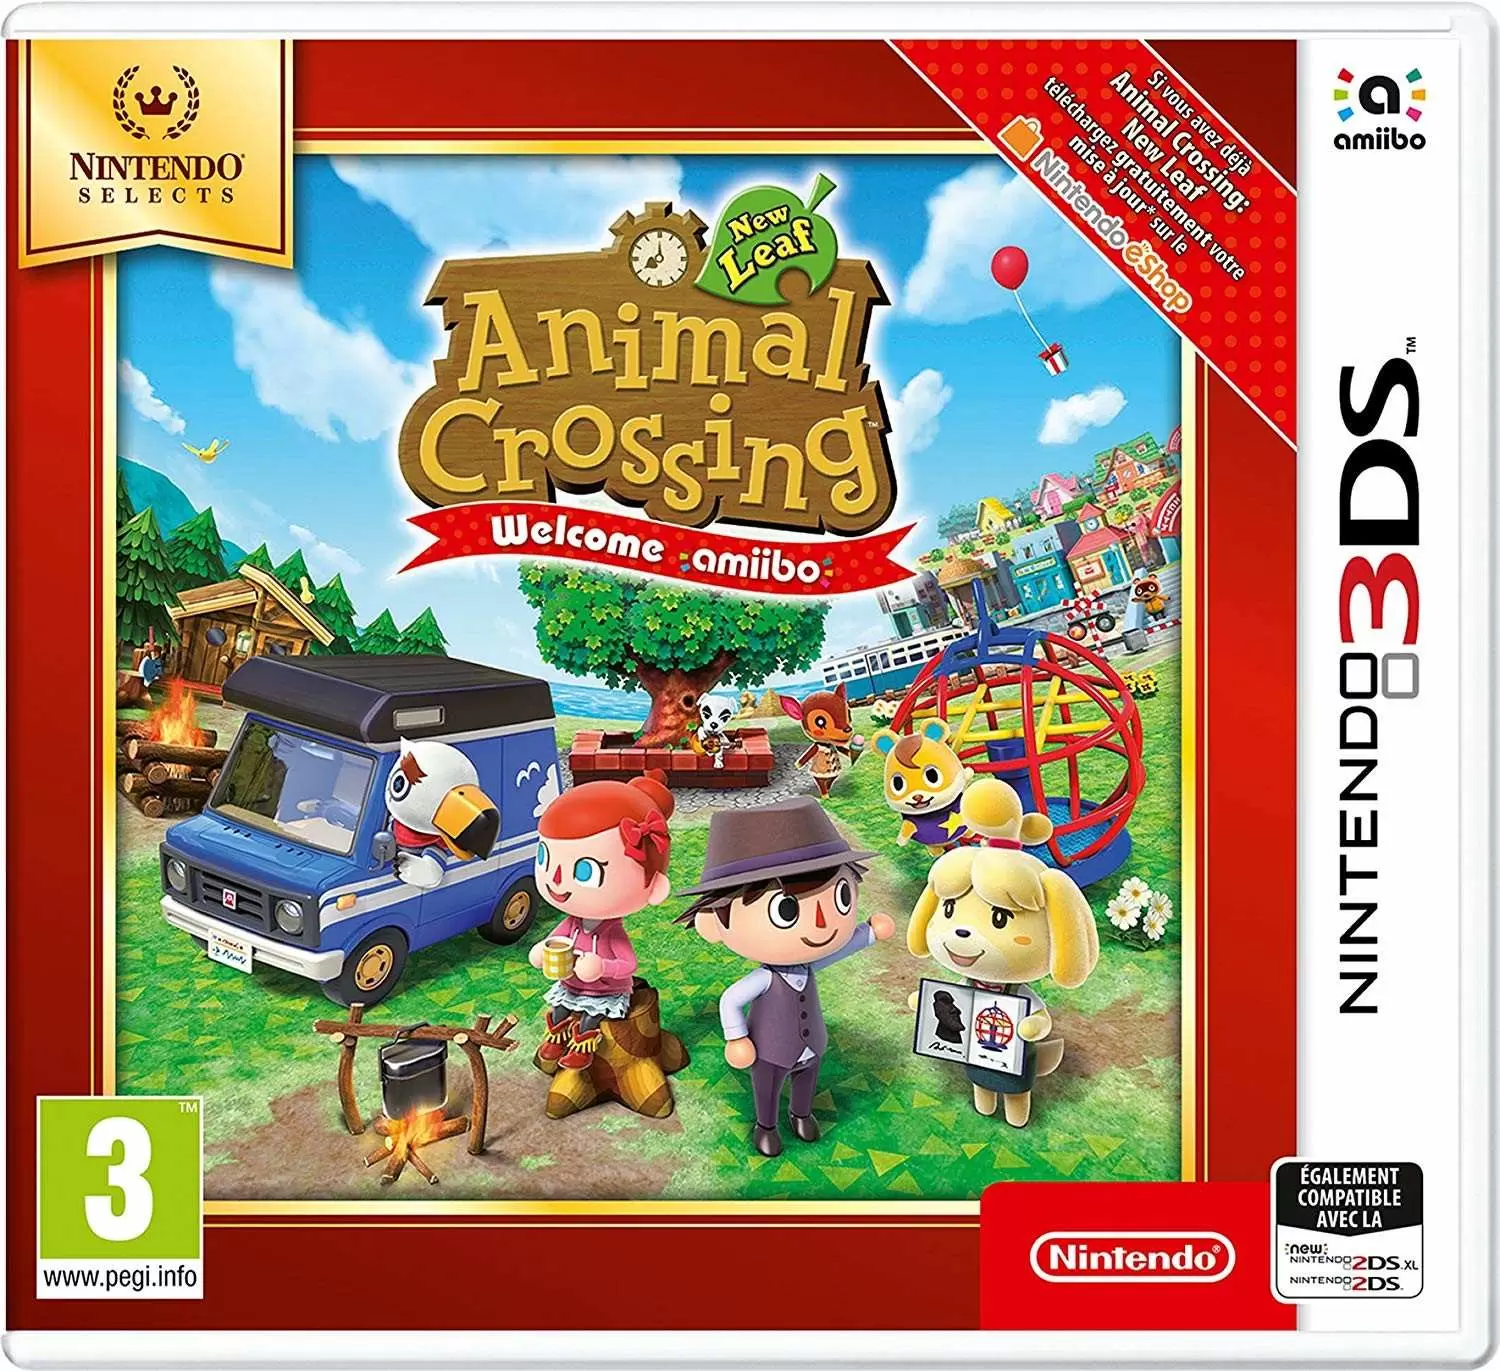 Nintendo 2DS / 3DS Games - Animal Crossing New Leaf Welcome Amiibo (Nintendo Selects)